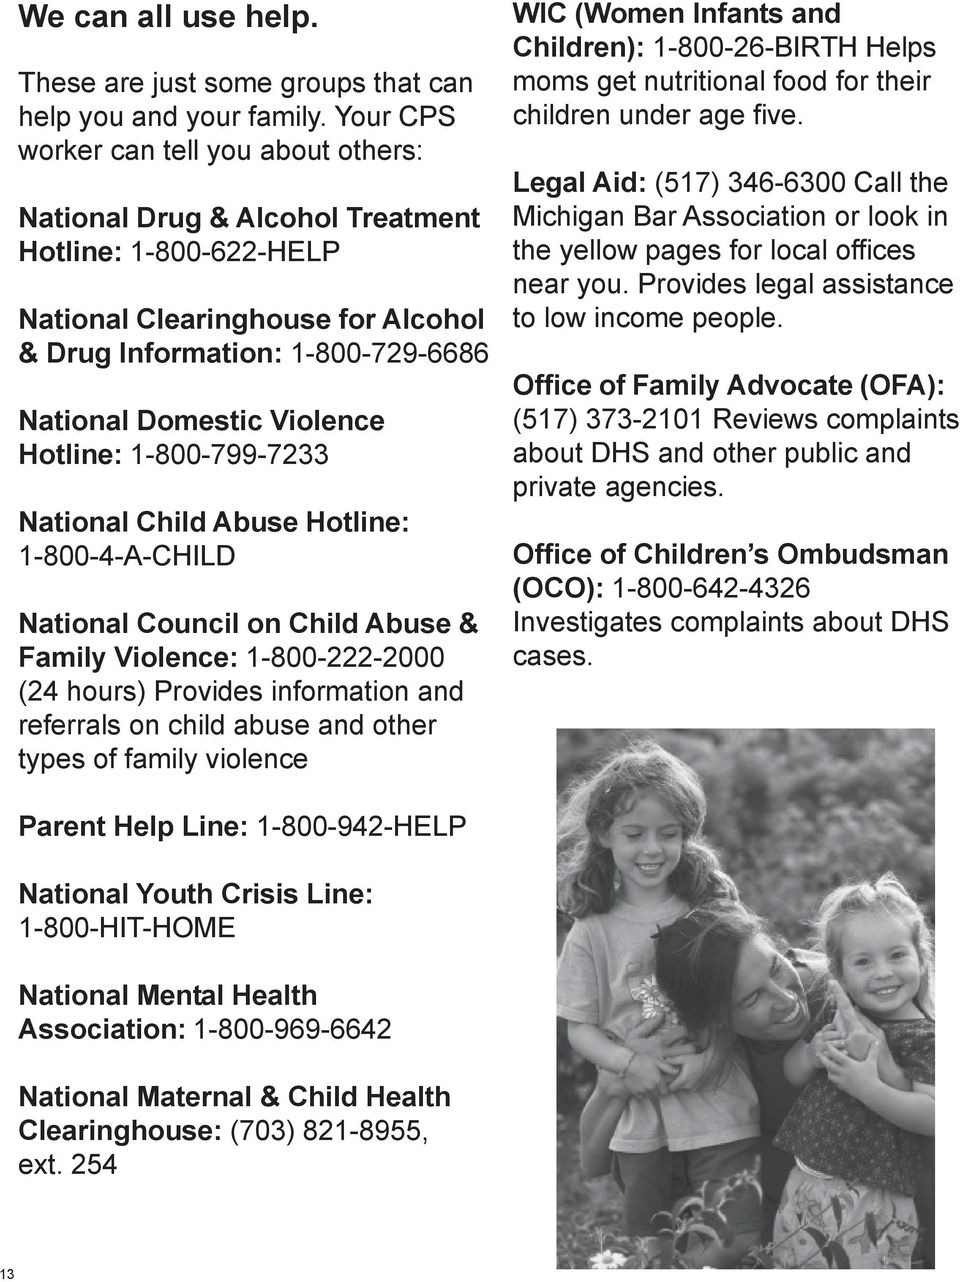 Hotline: 1-800-799-7233 National Child Abuse Hotline: 1-800-4-A-CHILD National Council on Child Abuse & Family Violence: 1-800-222-2000 (24 hours) Provides information and referrals on child abuse